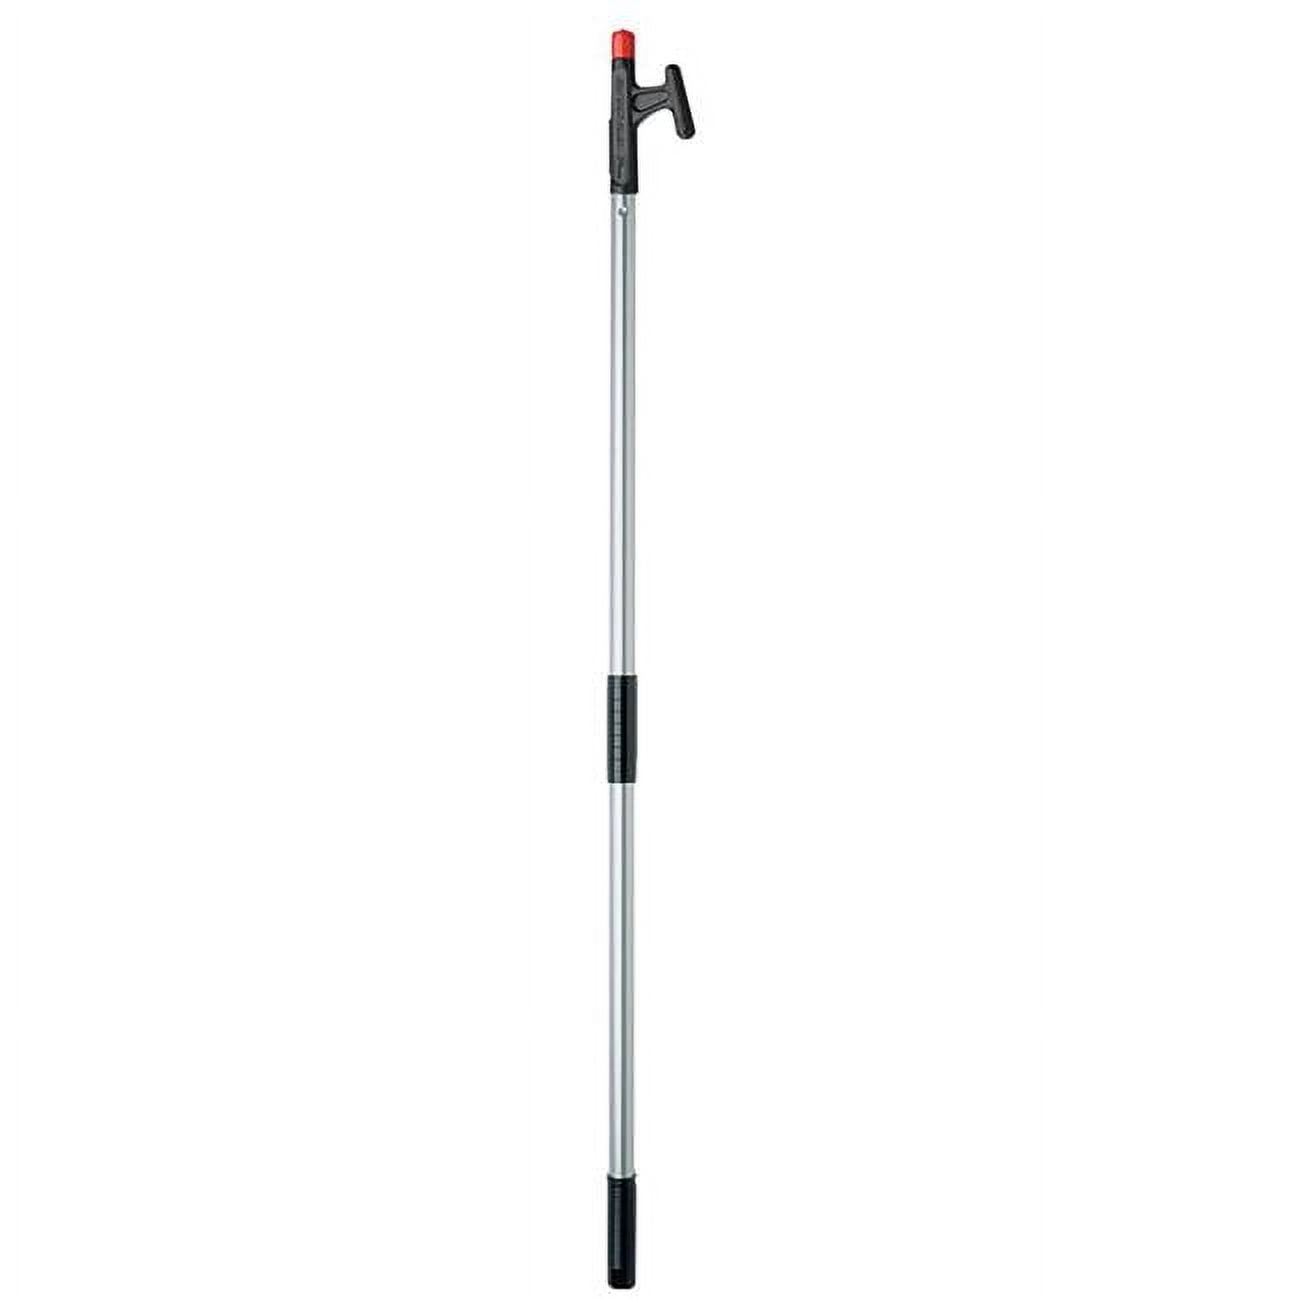  EVERSPROUT 5-to-12 Foot Telescoping Boat Hook